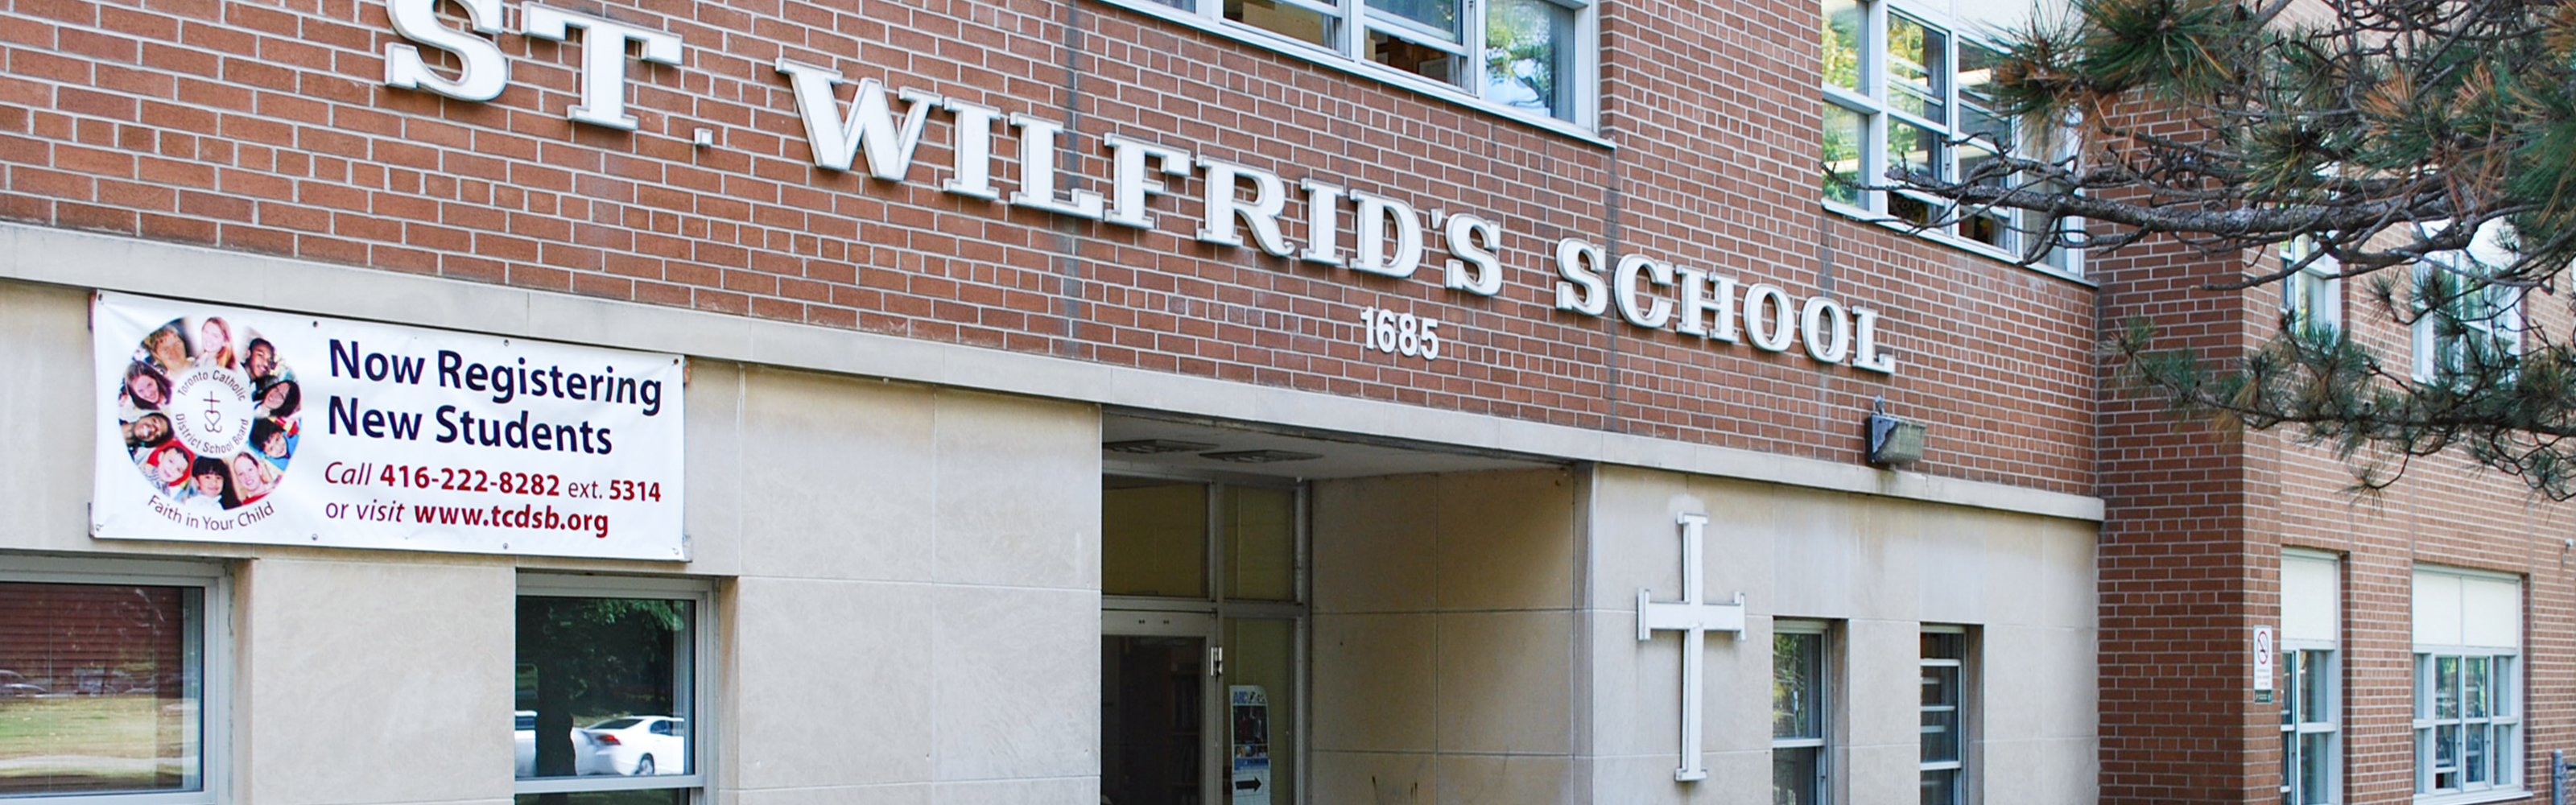 The front of the St. Wilfrid Catholic School building.